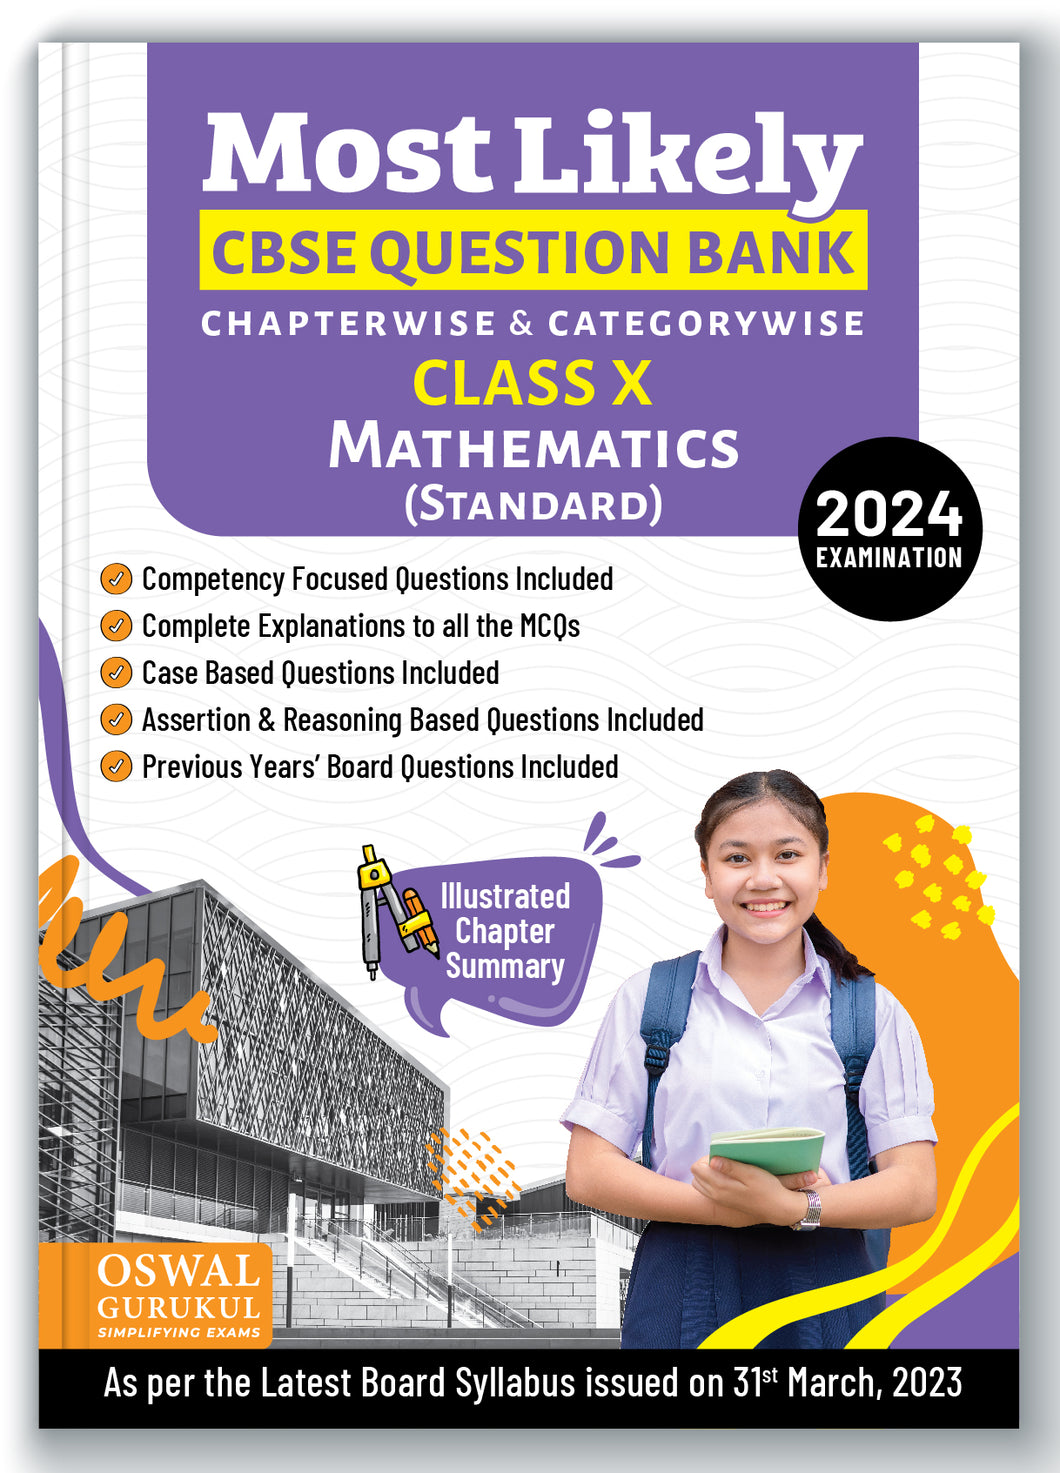 Oswal - Gurukul Mathematics Most Likely Question Bank : CBSE Class 10 for 2024 Exam